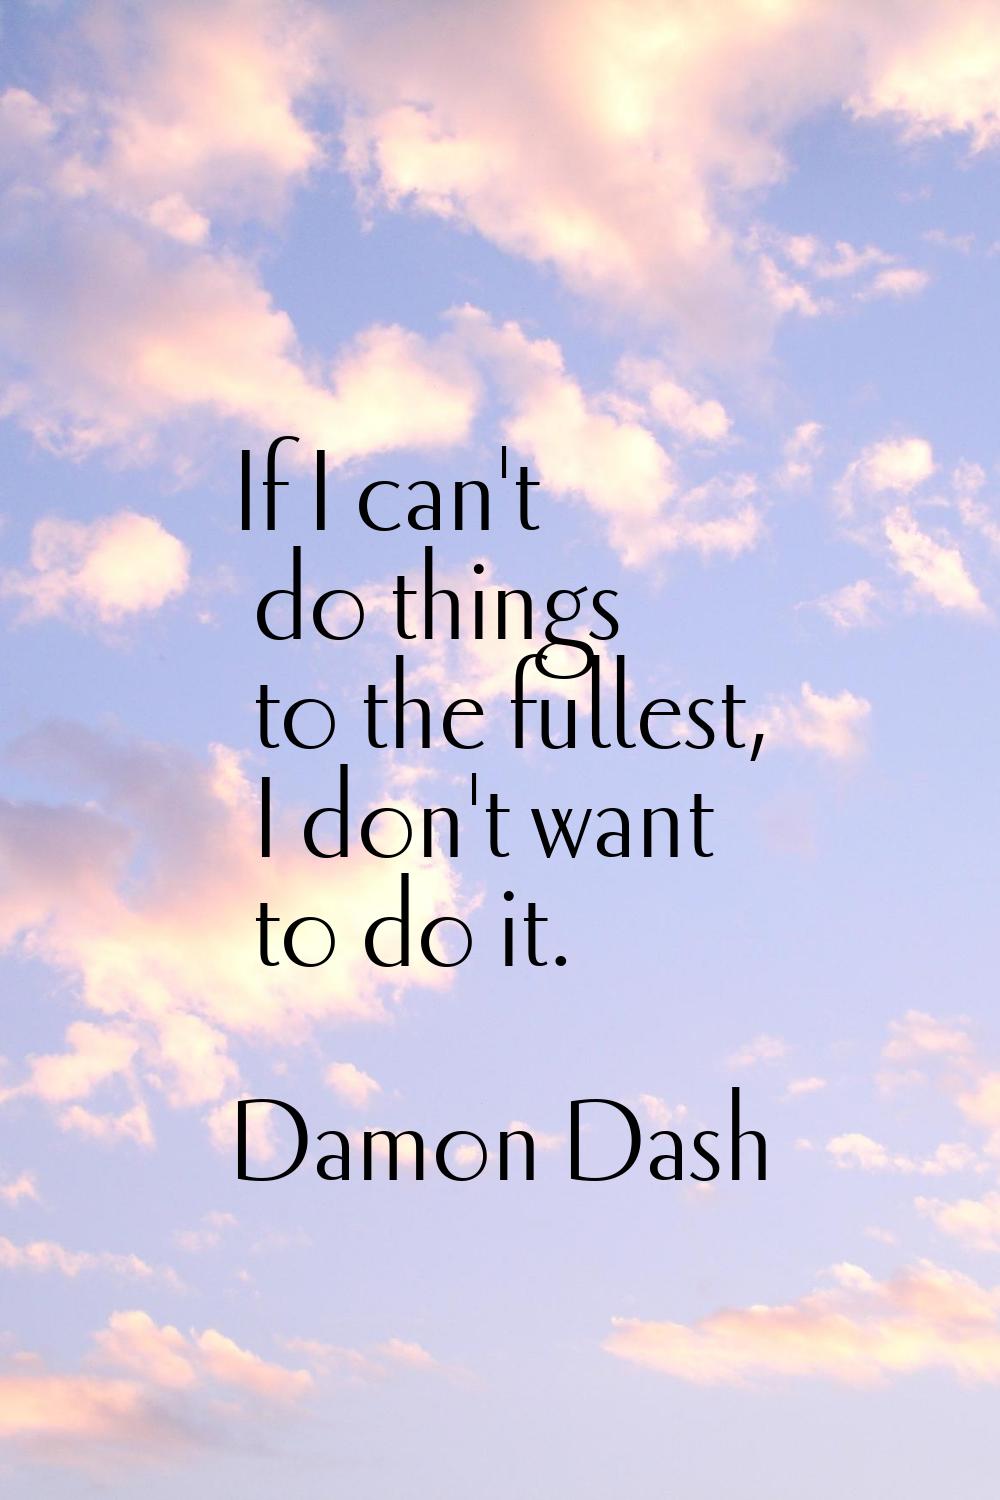 If I can't do things to the fullest, I don't want to do it.